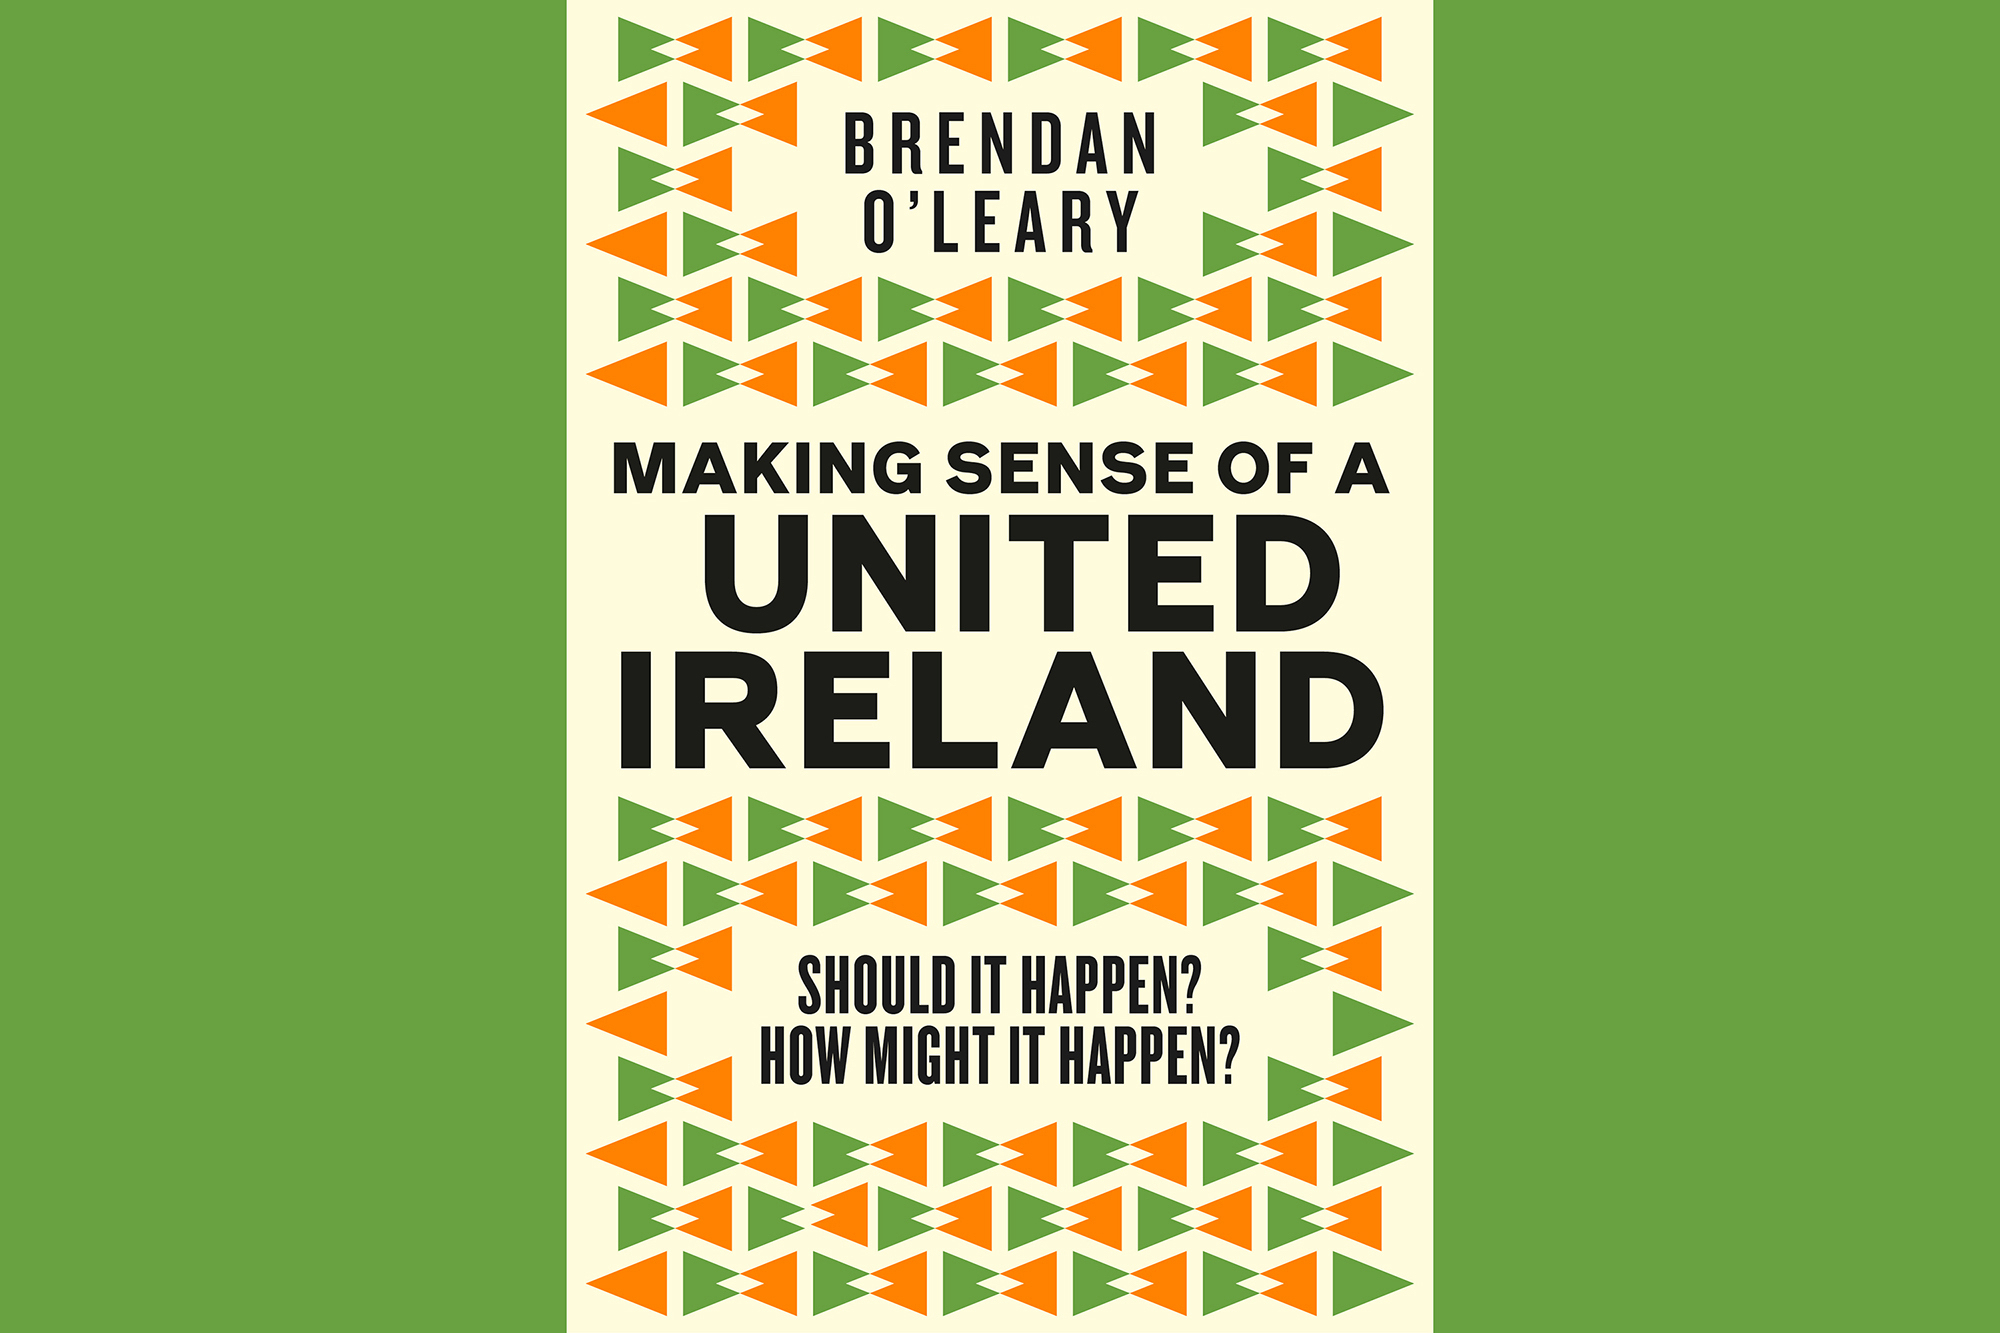 Book jacket of political scientist Brendan O'Leary's new book entitled Making Sense of a United Ireland, with orange and green detailing across the front